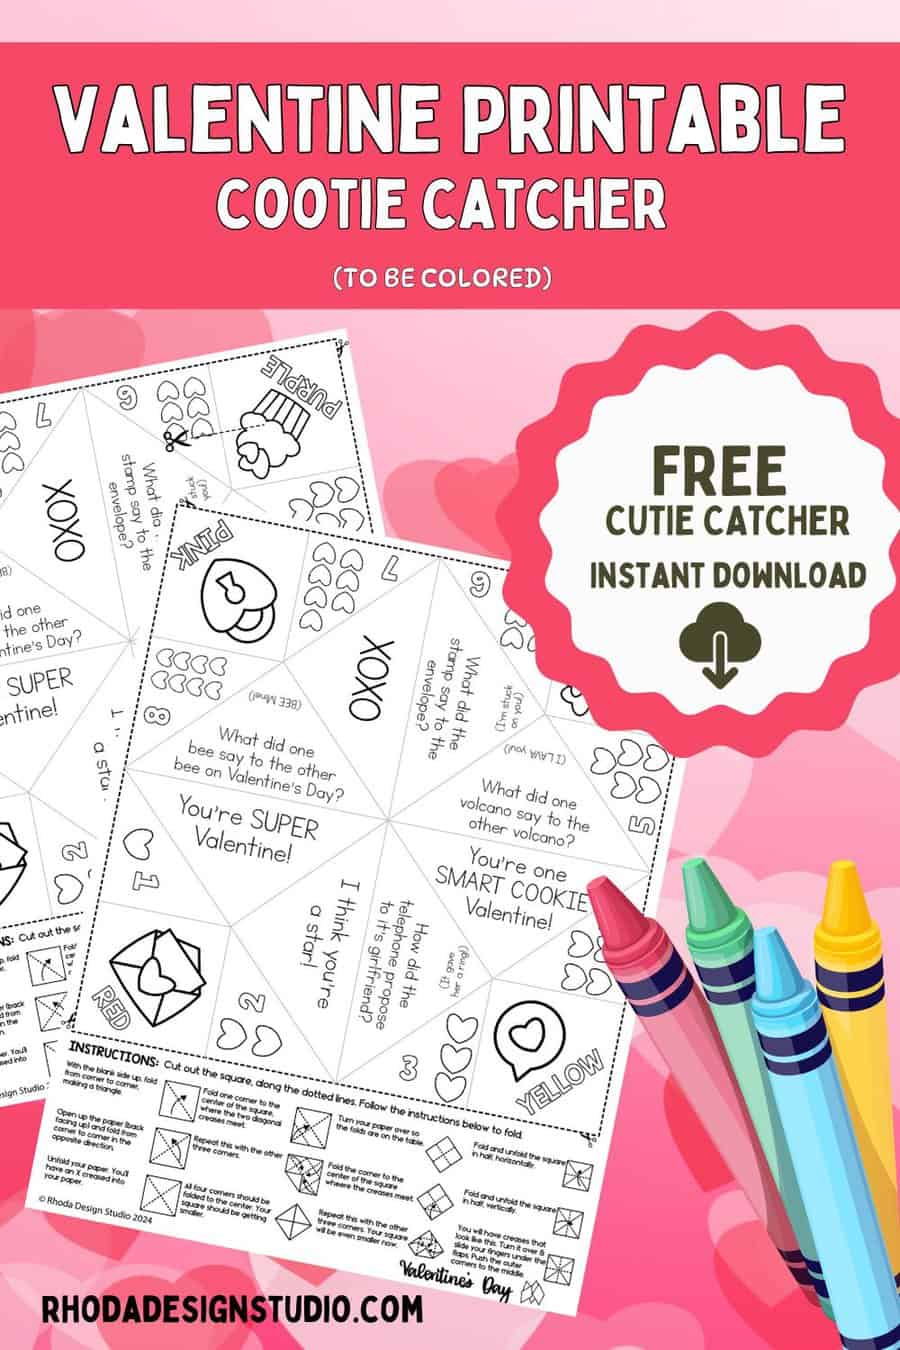 28 Sweet Sayings & Jokes and a Free Valentines Day Cootie Catcher